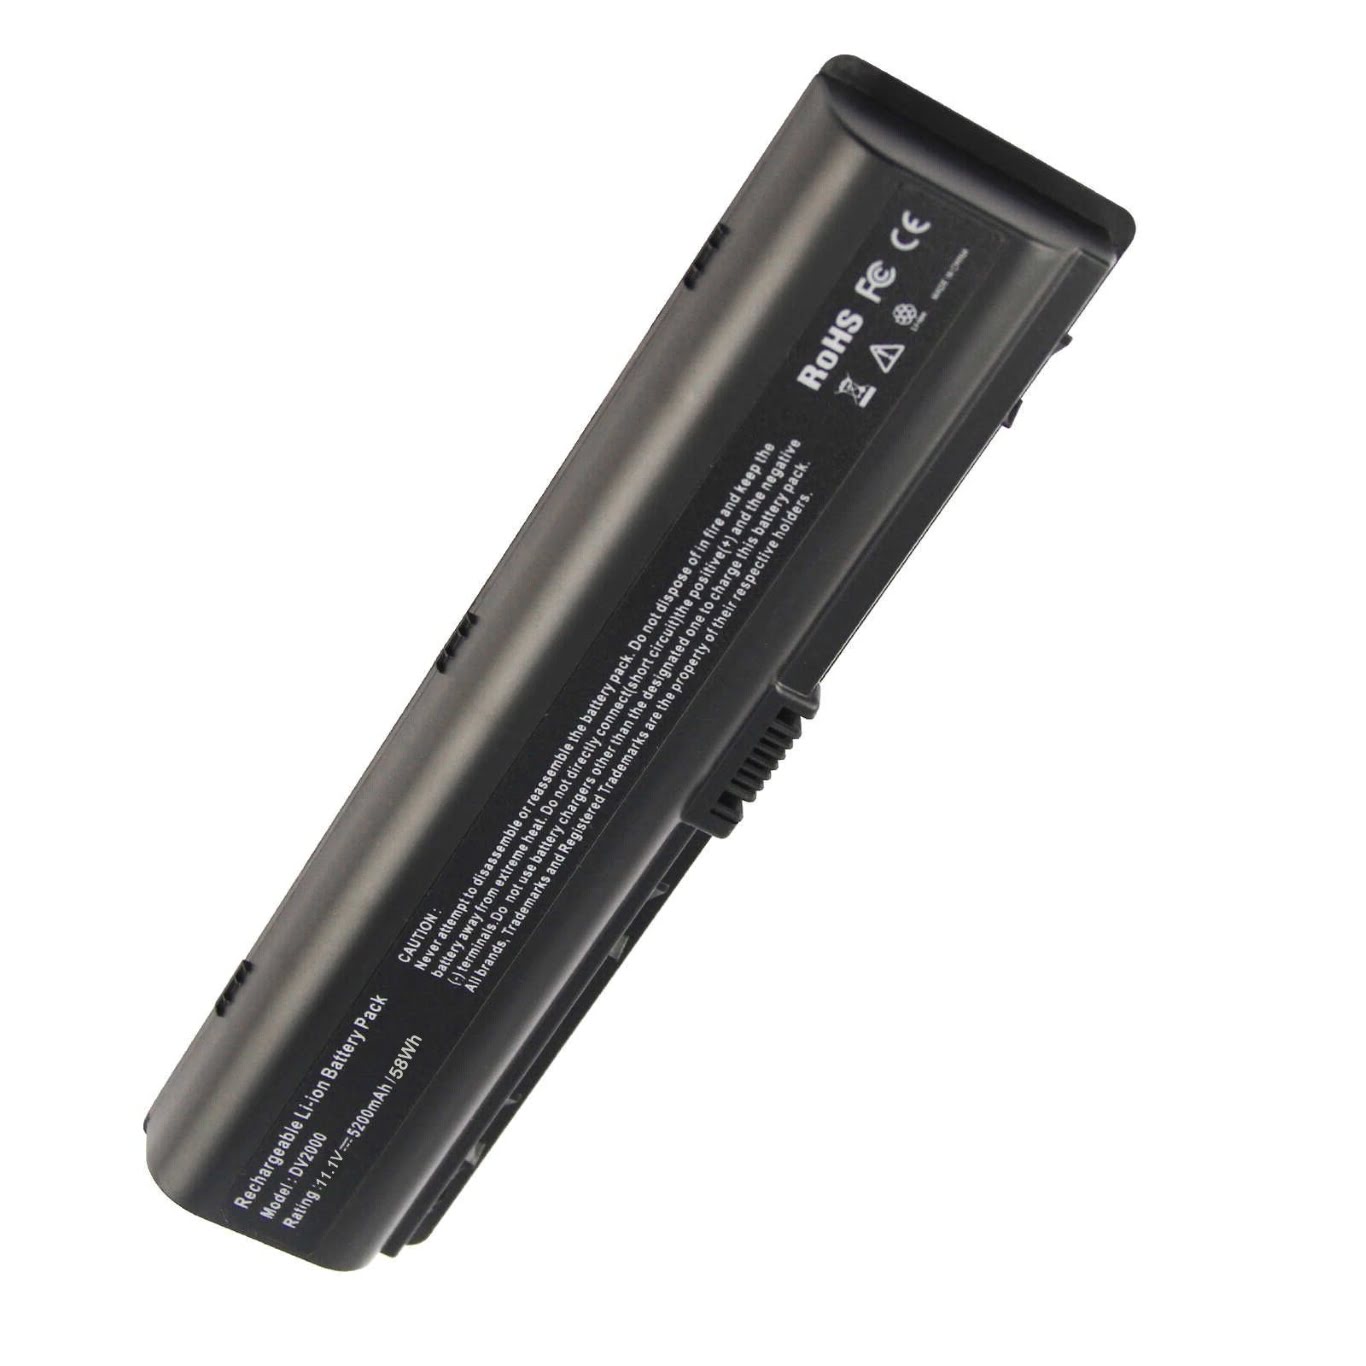 411462-121, 411462-141 replacement Laptop Battery for HP 6000XX, CTO, 11.1 V, 5200mAh, 6 cells